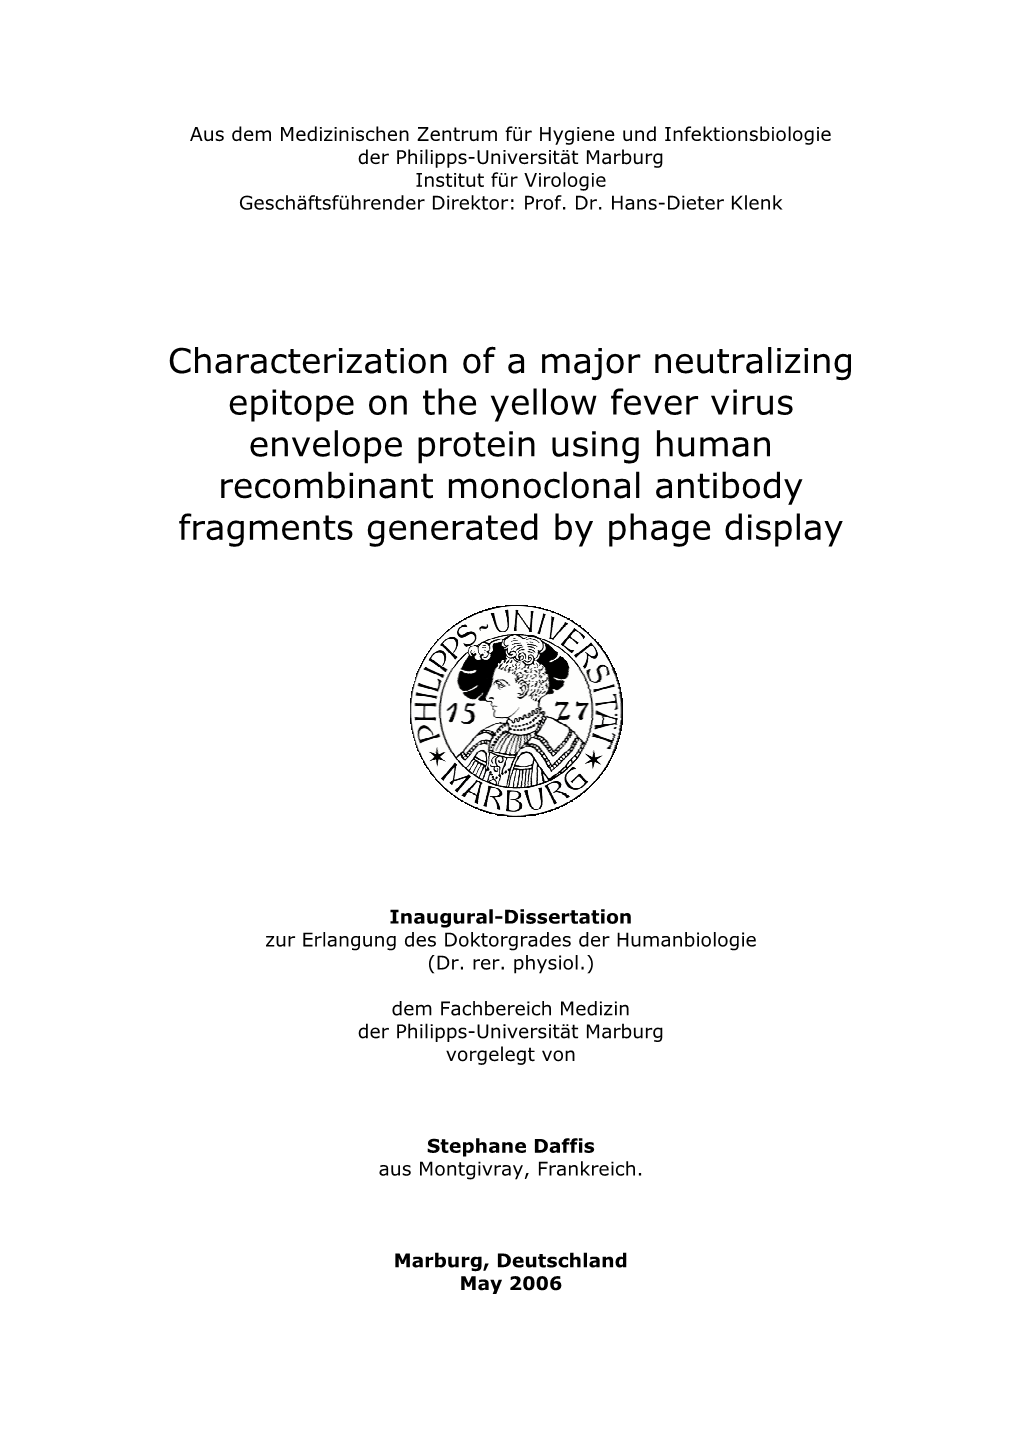 Characterization of a Major Neutralizing Epitope on the Yellow